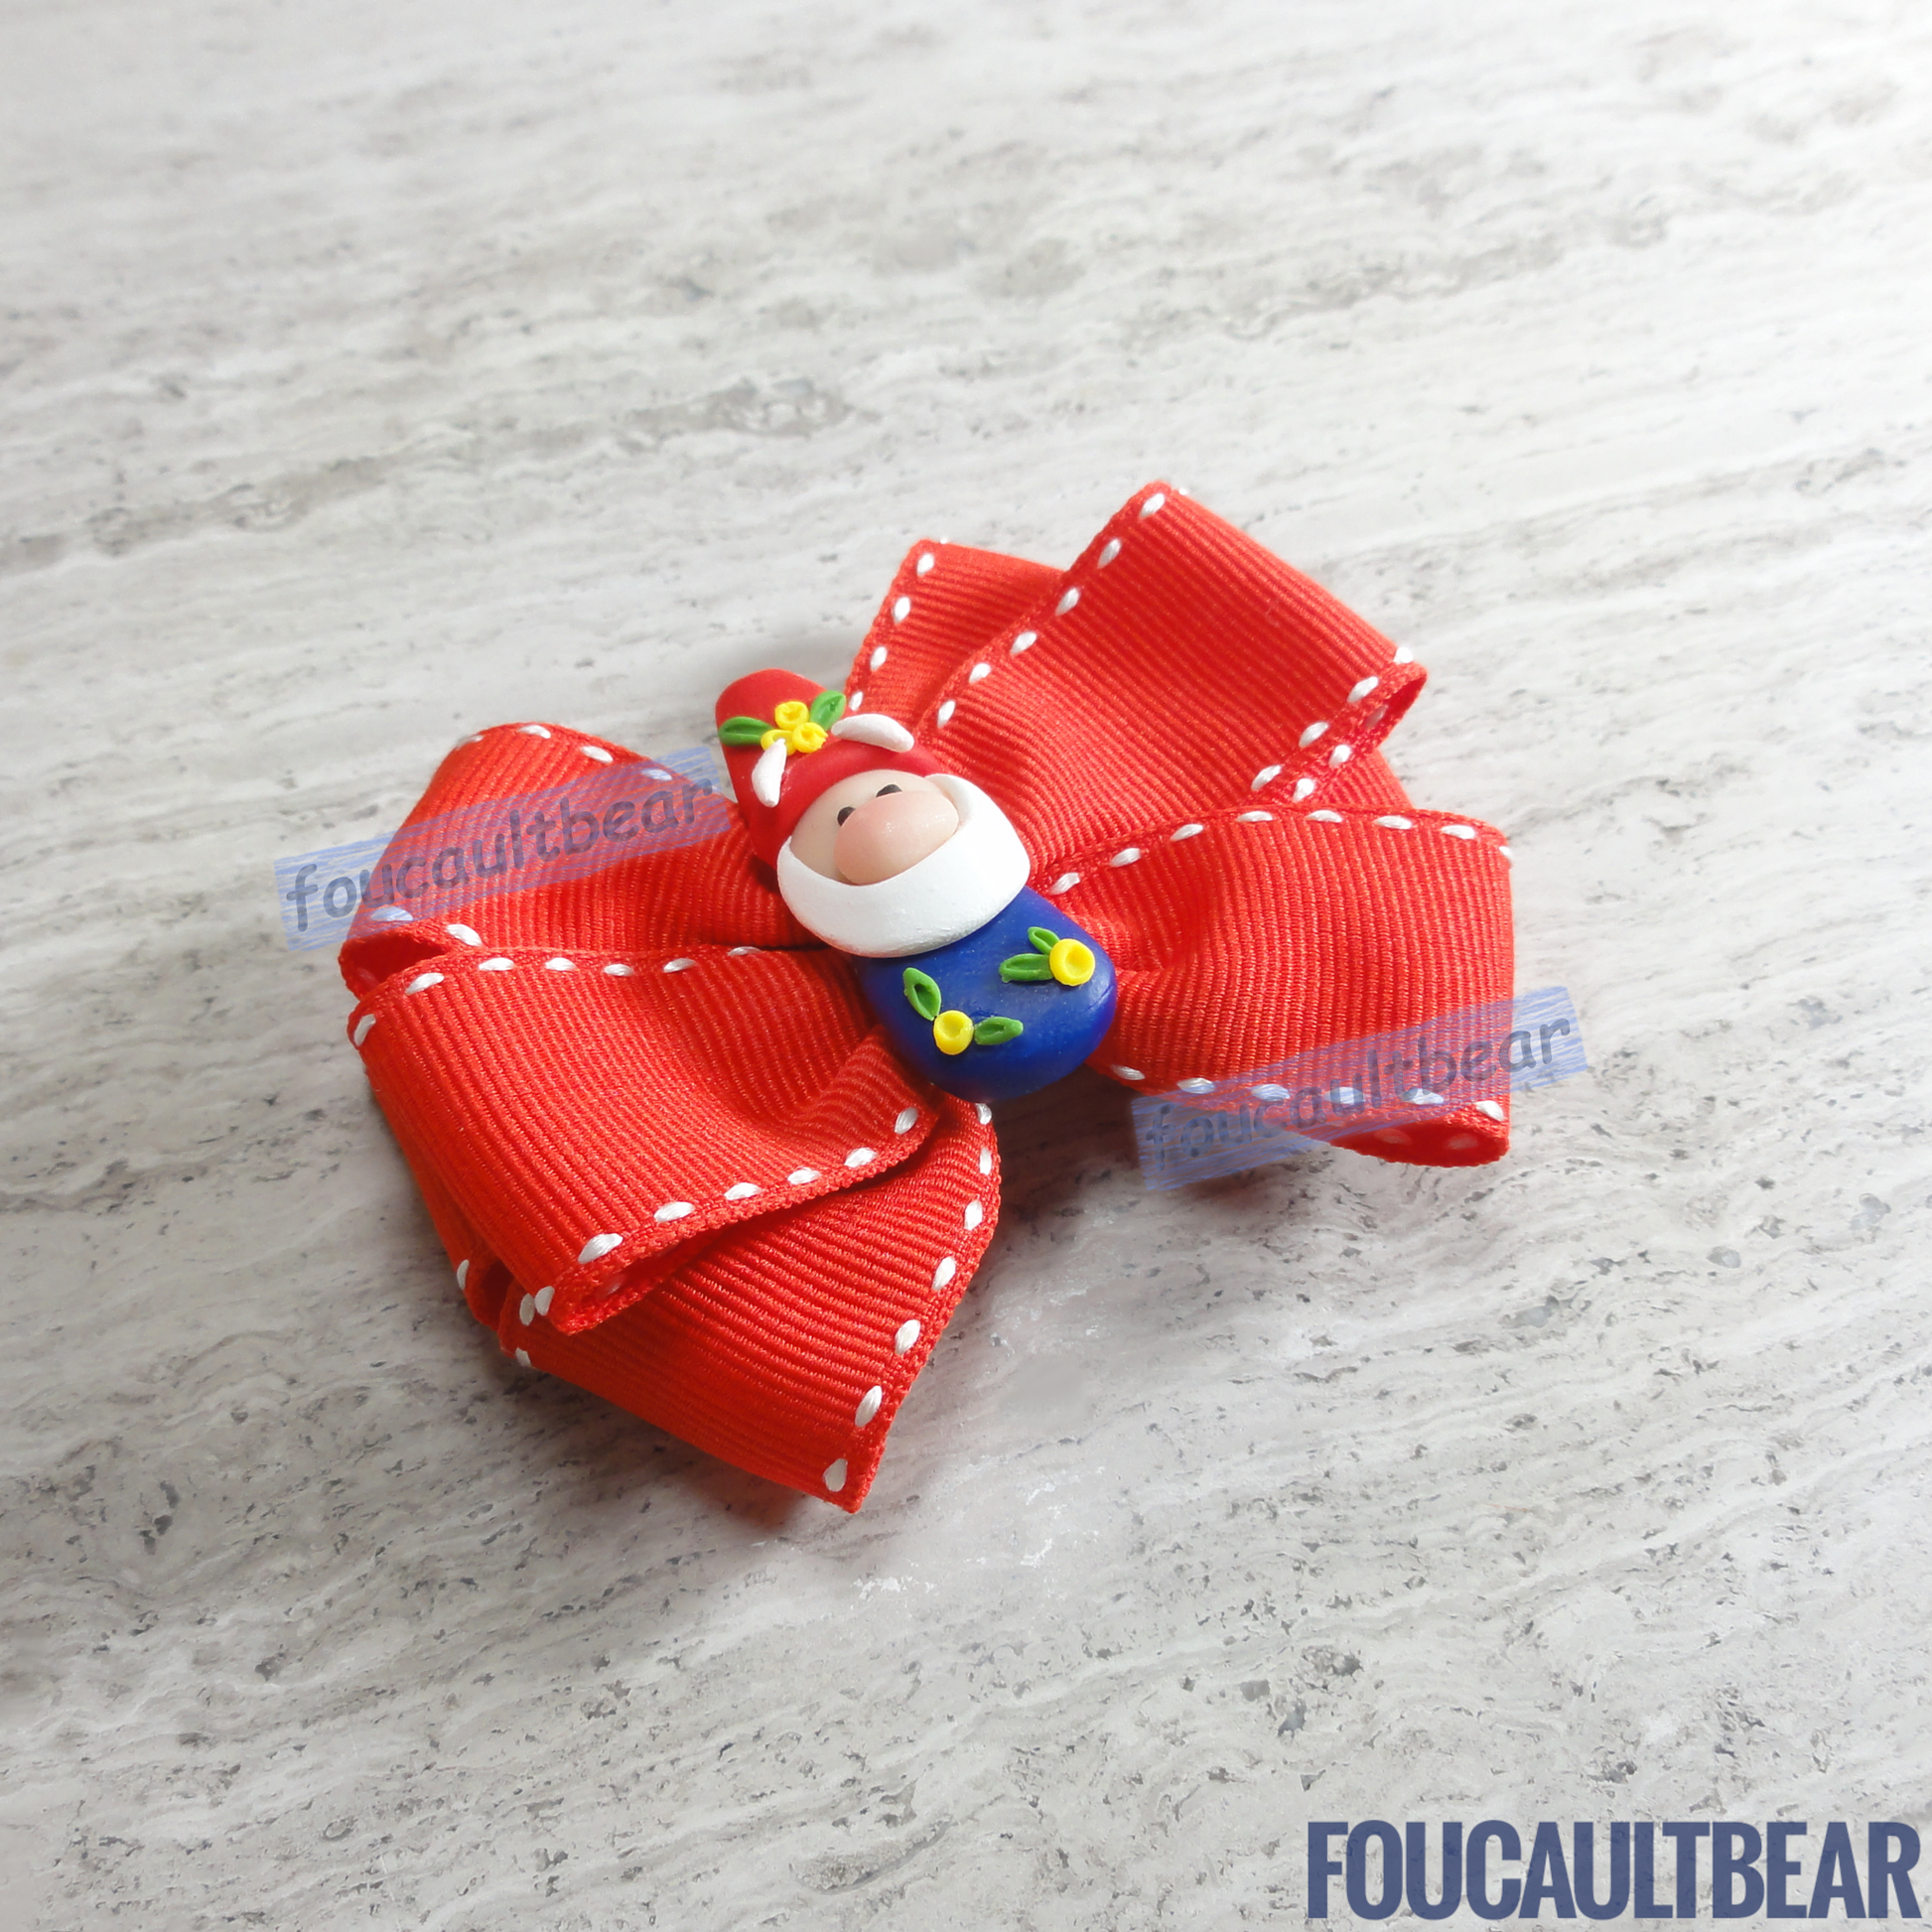 Foucaultbear's HANDMADE MULTI-LAYERED HAIR BOW CLIP with CLAY CENTERPIECE. Garden Gnome in Festive Red & Blue. Handmade Polymer Clay Centerpiece. Grosgrain Ribbon. French Barrette Hair Bow for Ponytail & Pigtails. Adorable Garden/Holiday Gnome centerpiece adorns this hair bow barrette. Perfect for toddlers, preschoolers, kindergartners, elementary or even middle-schoolers for the coming holiday season. Suitable for year-round wearing too. 